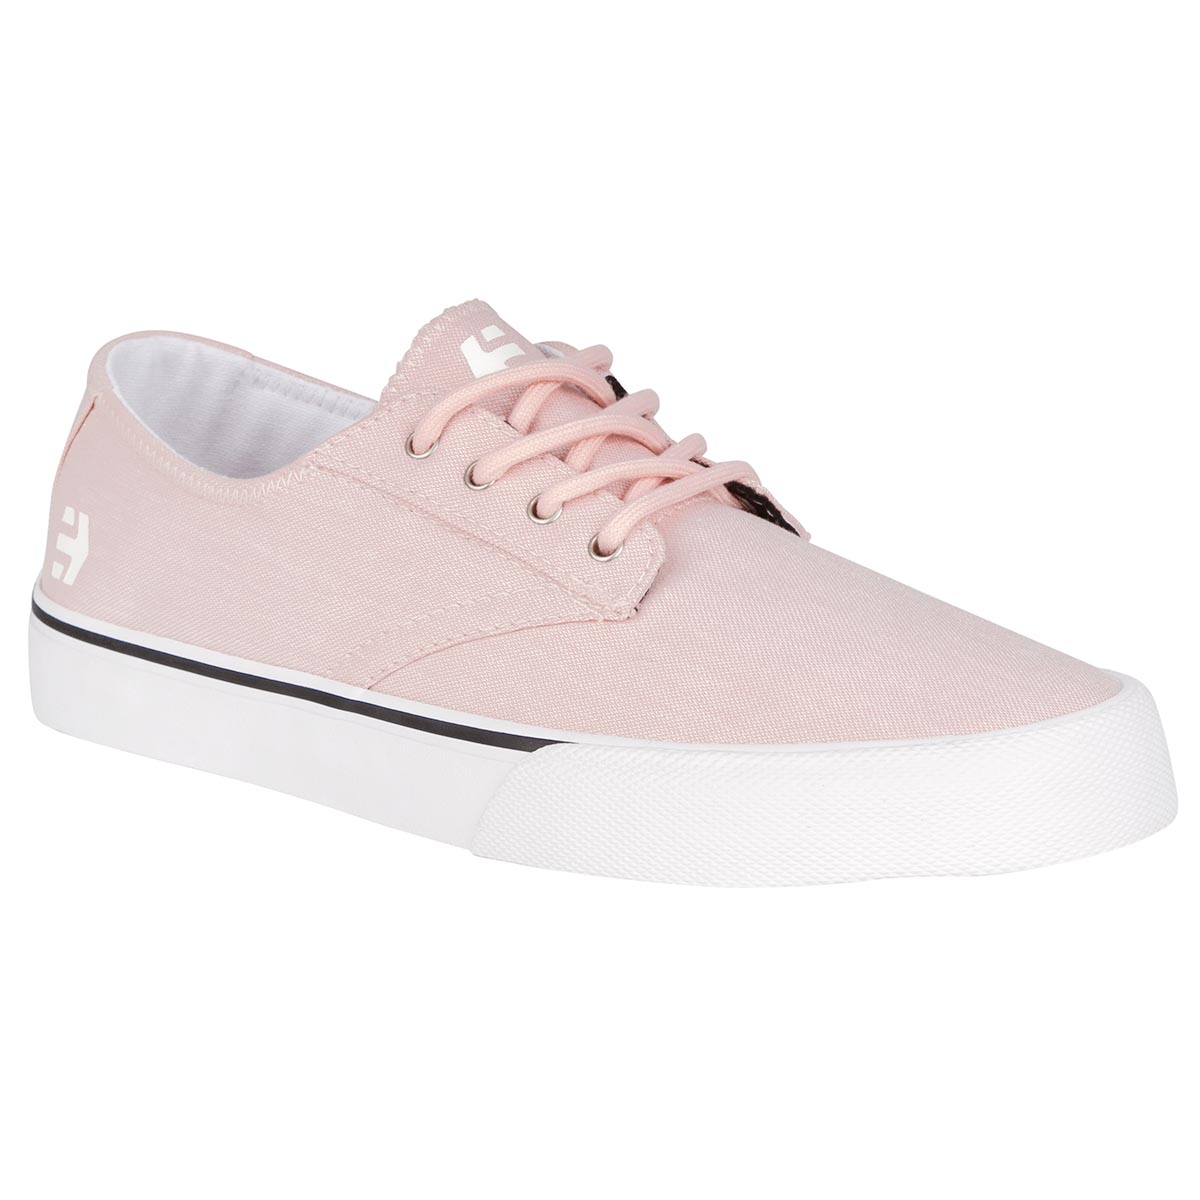 Men's Shoes Etnies Jameson Vulc LS Trainers in Pink Clothing, Shoes ...